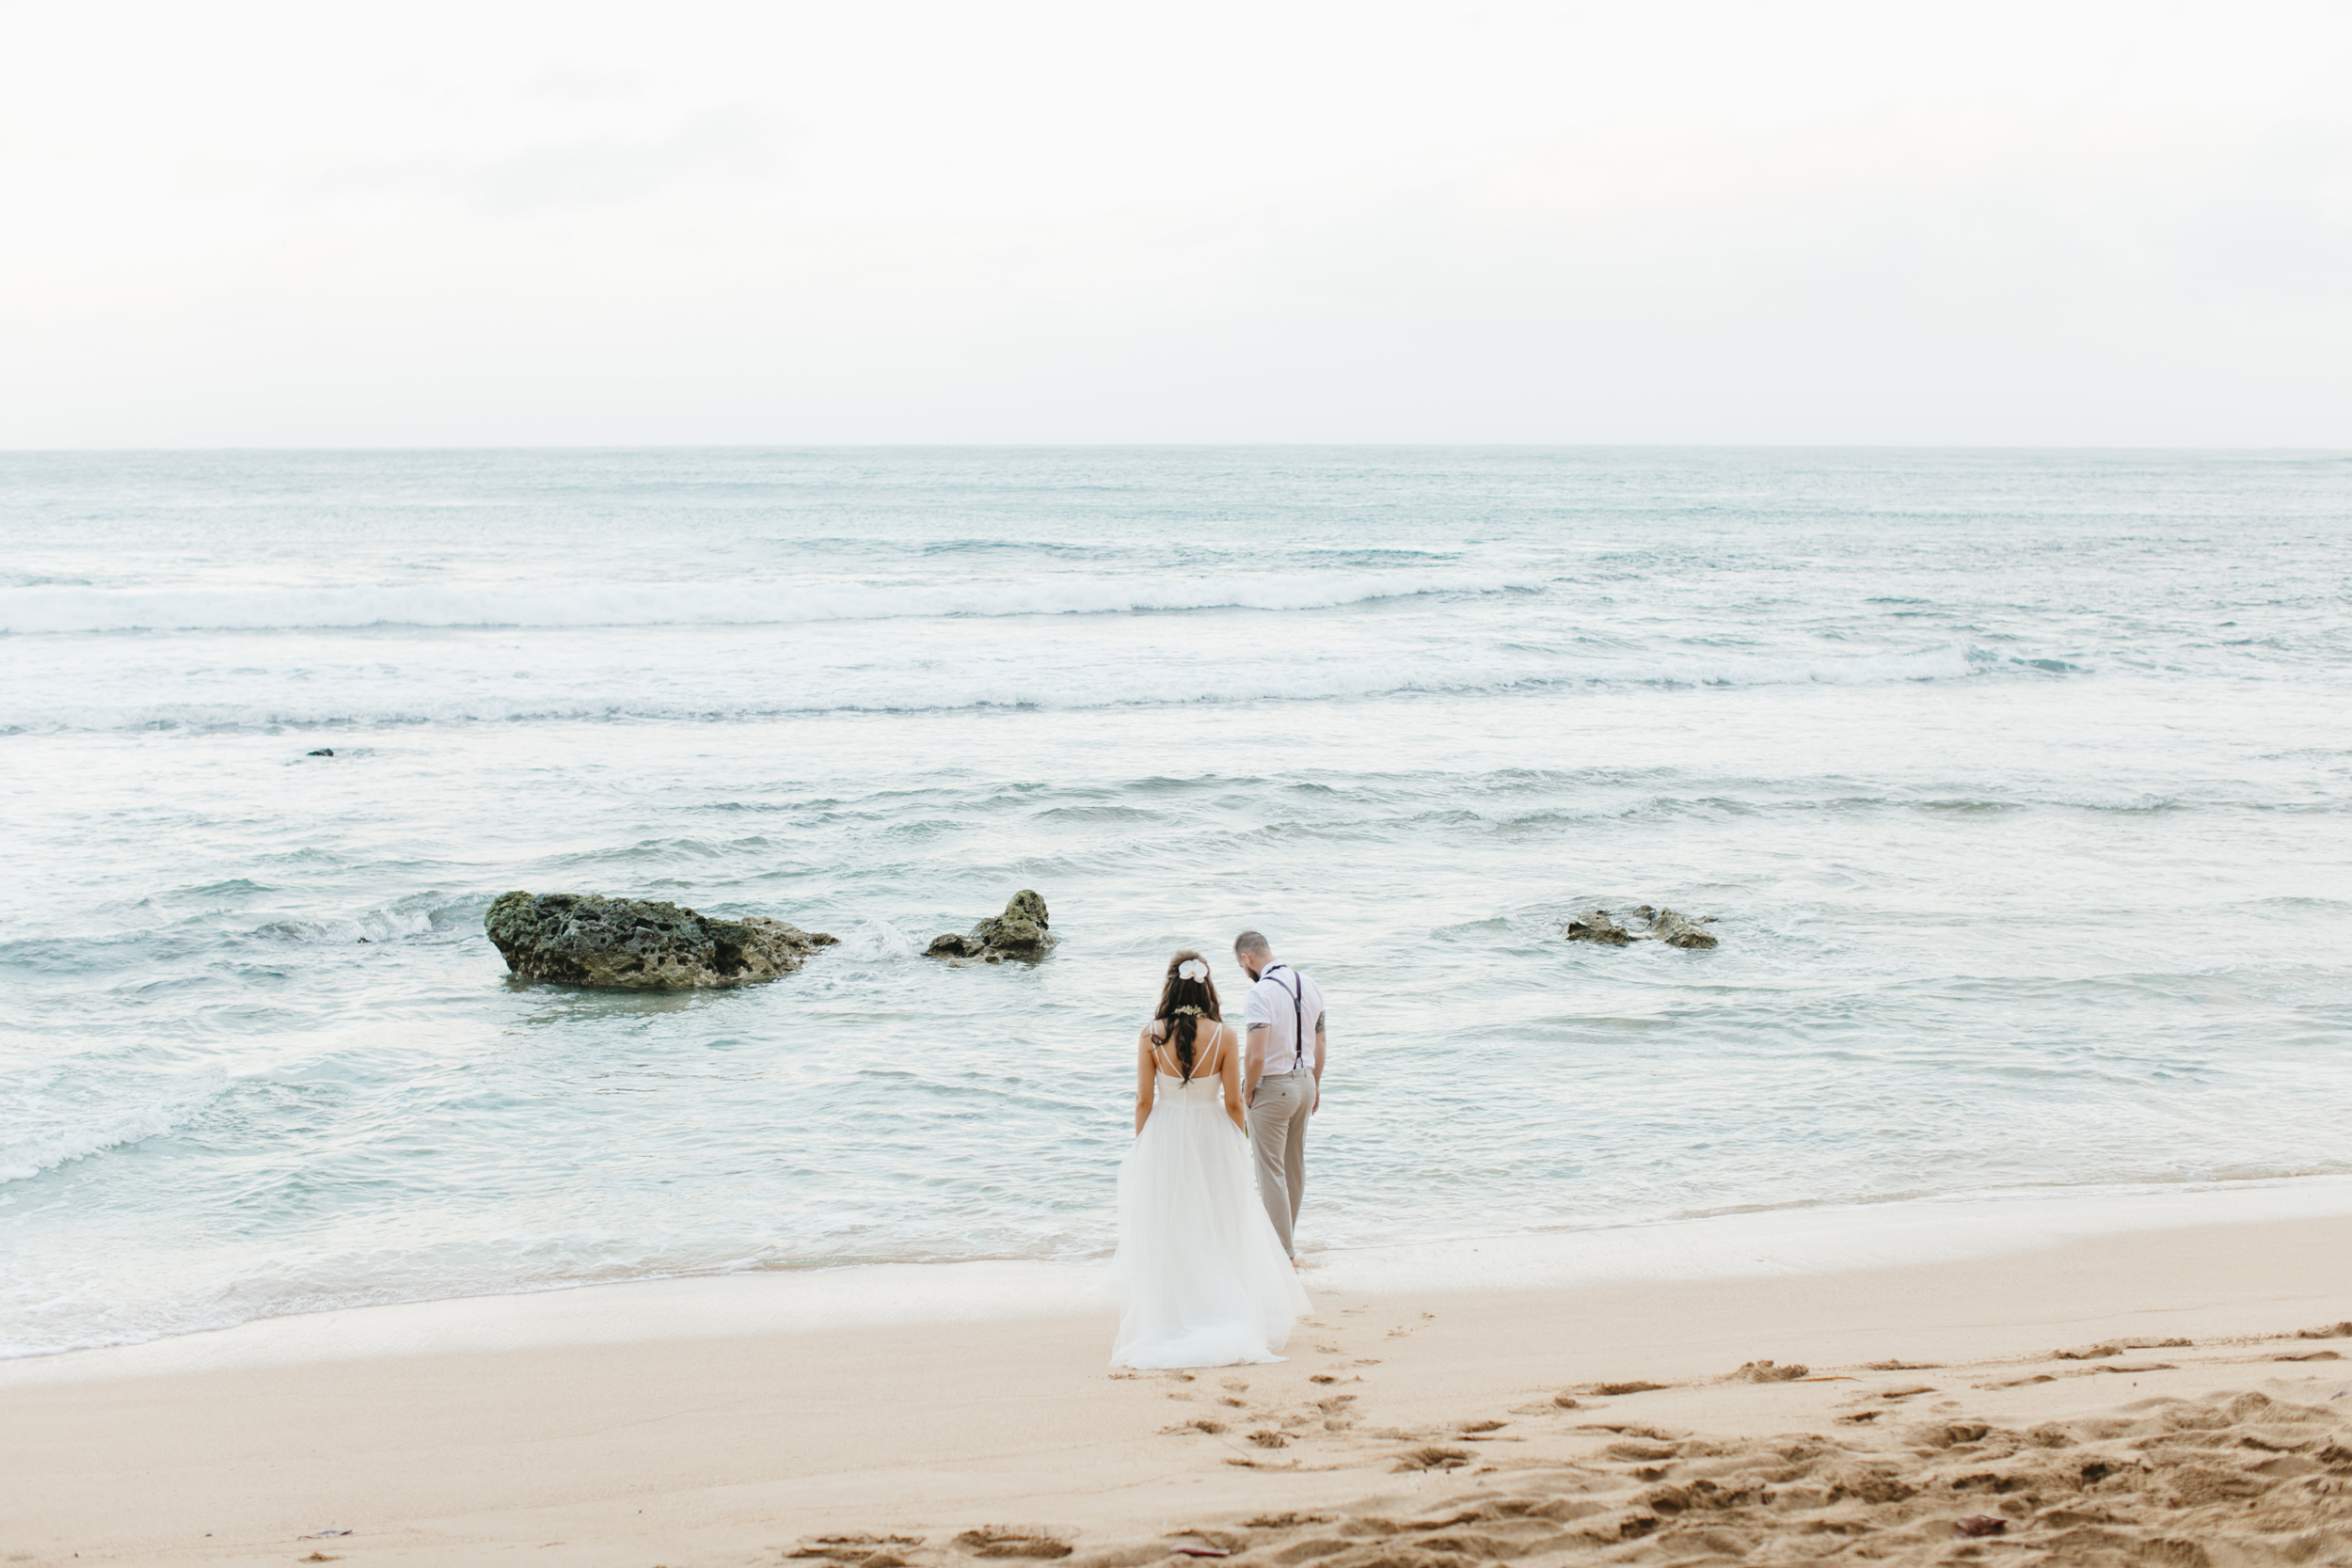 A couple walks on the beach after Tunnels Beach Elopement Ceremony by Kauai Wedding Photographers Colby and Jess